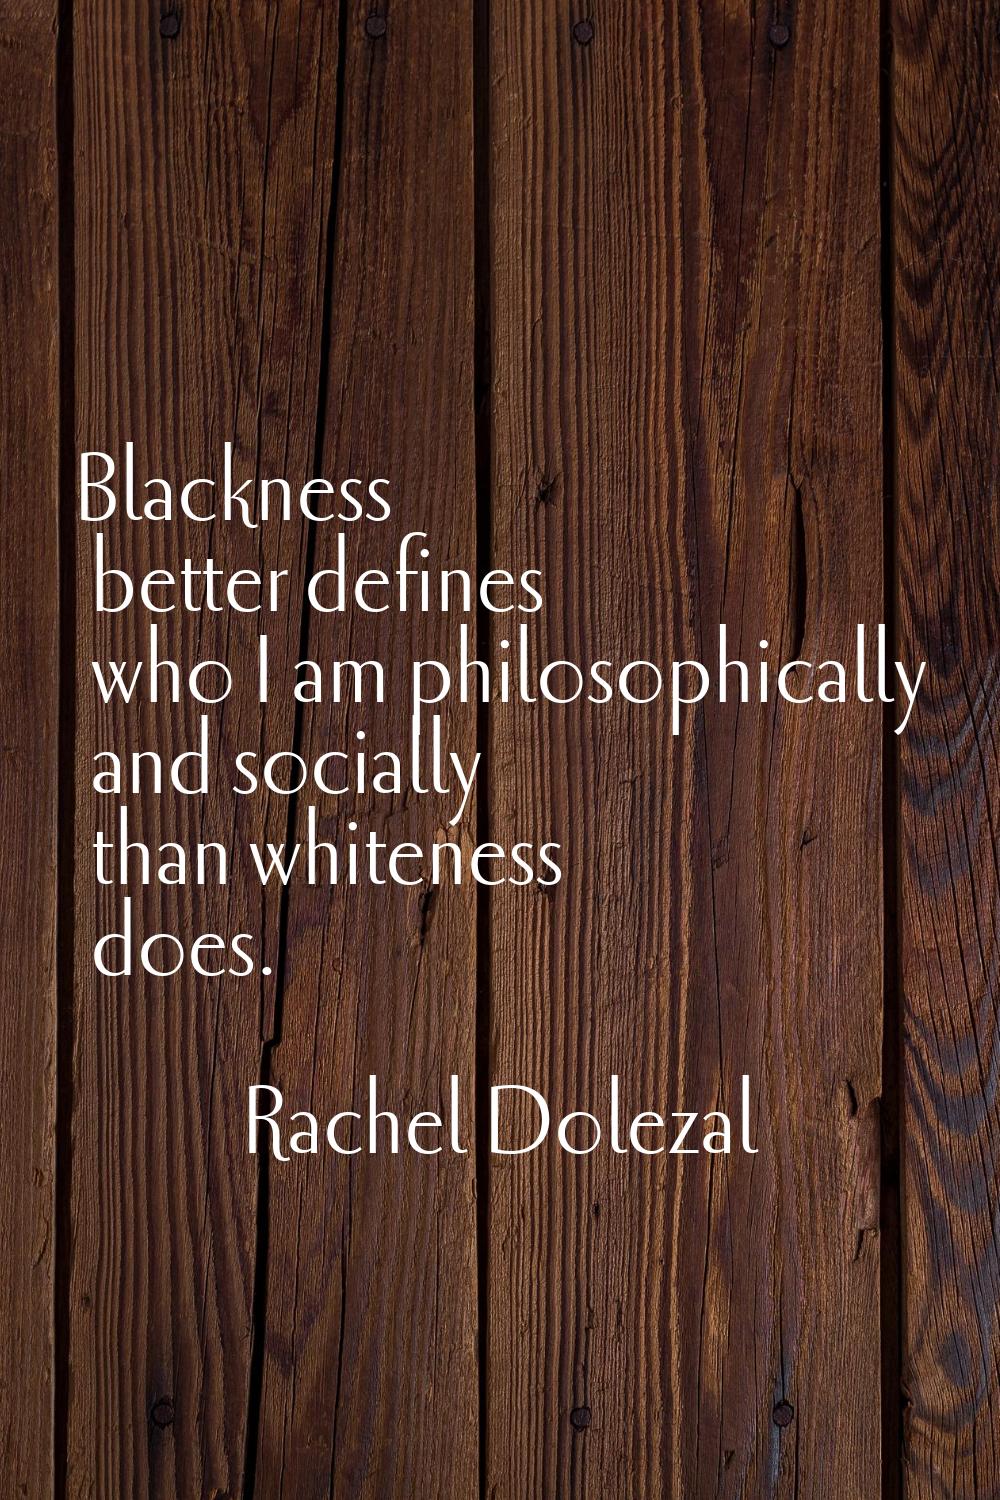 Blackness better defines who I am philosophically and socially than whiteness does.